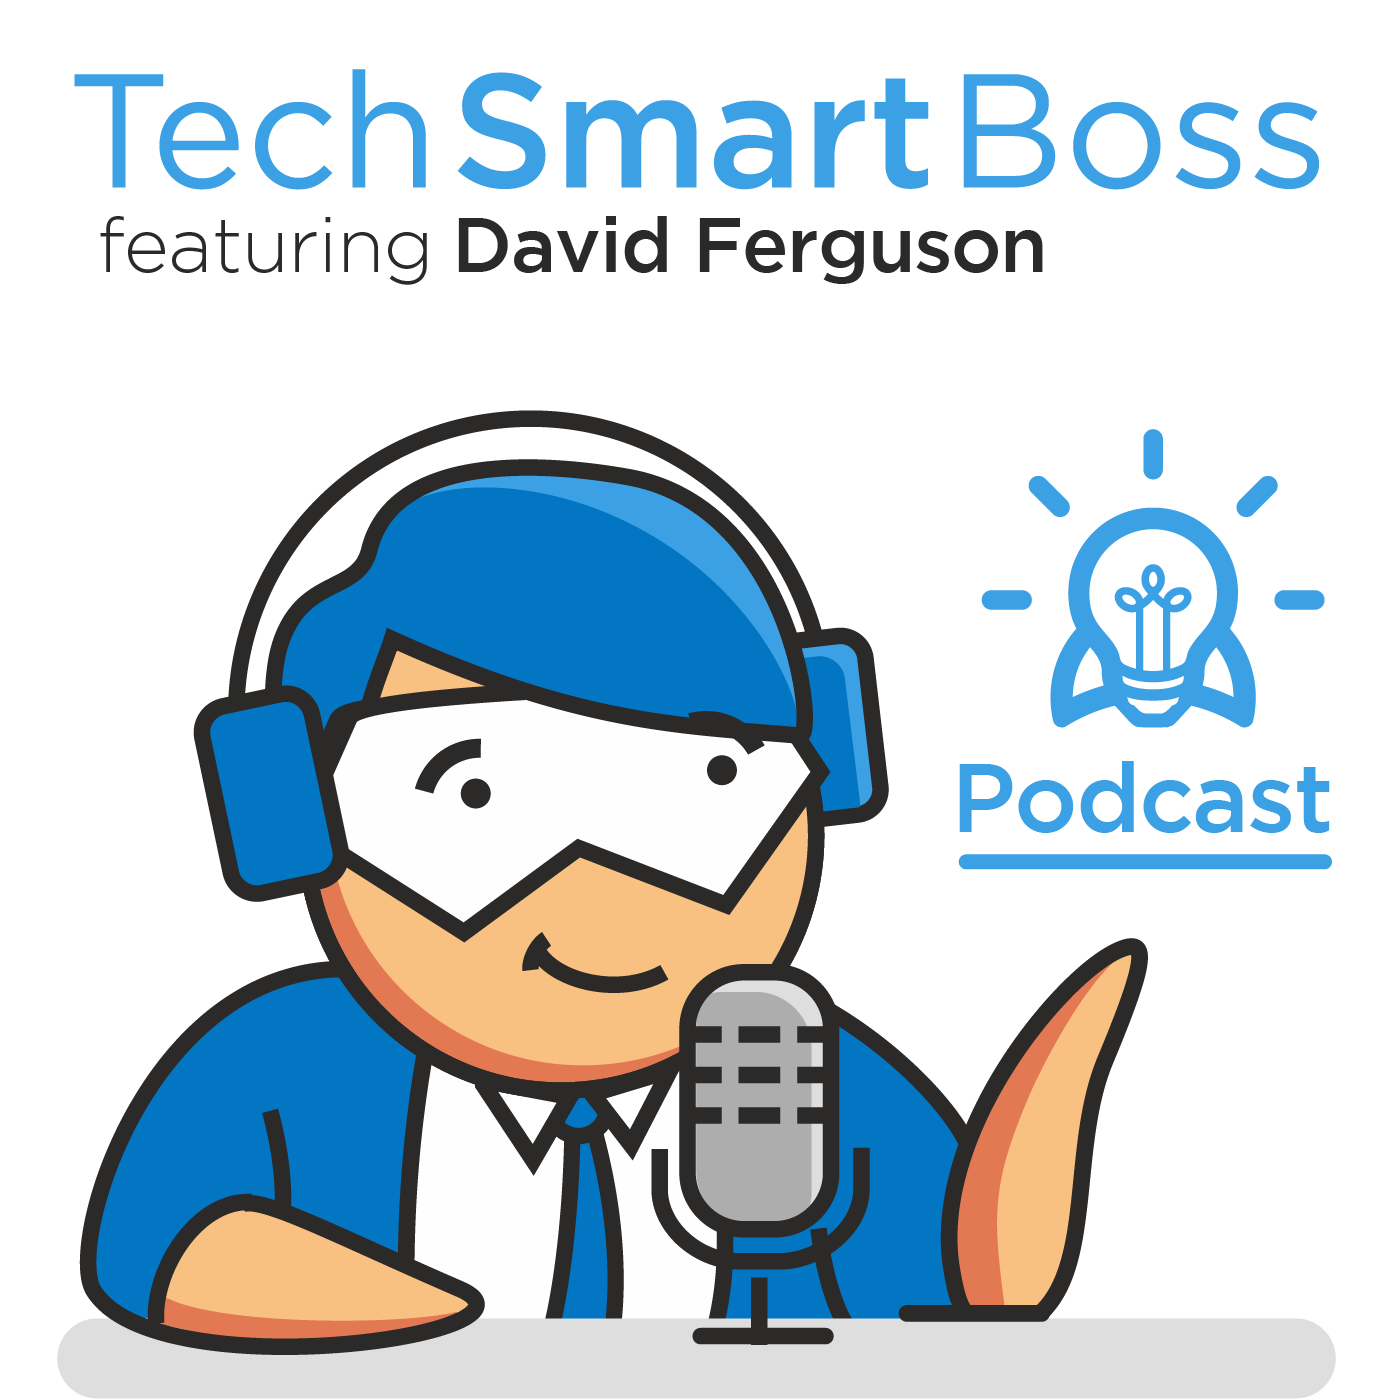 Episode 63: How to Set Up A YouTube Channel for Your Business or Brand (the Tech Smart Boss Way)